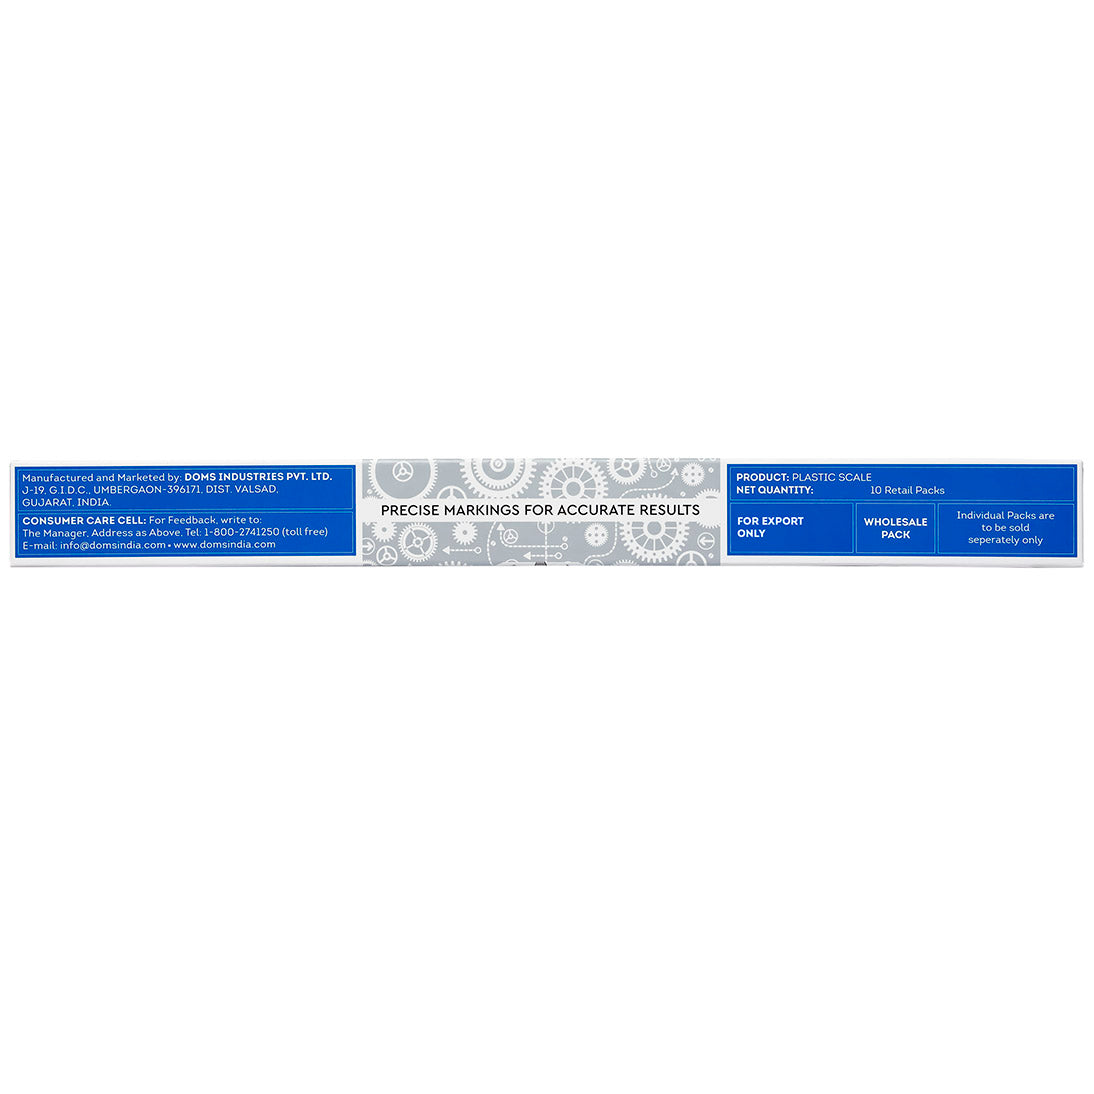 DOMS M-Tech Slim Scale Rulers 30 cms Pack of 10